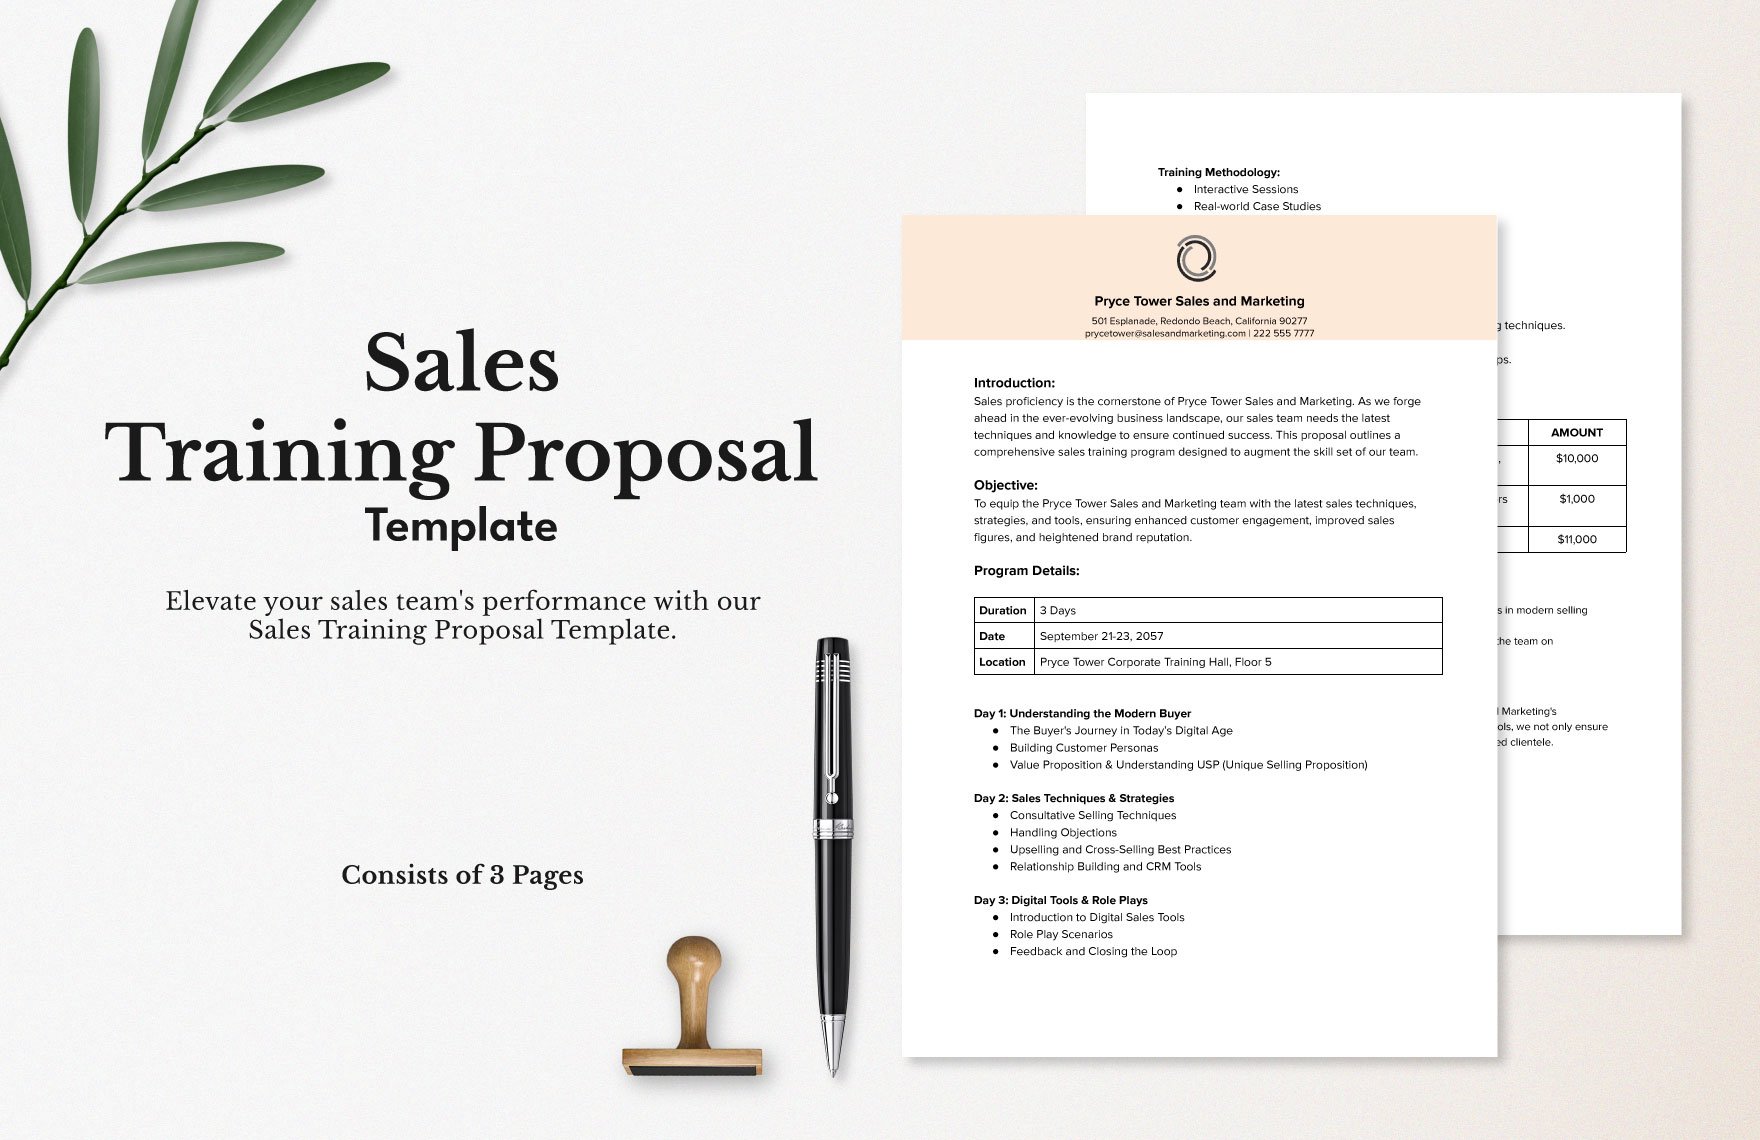 Sales Training Proposal Template in Word, Google Docs, PDF, Apple Pages, InDesign